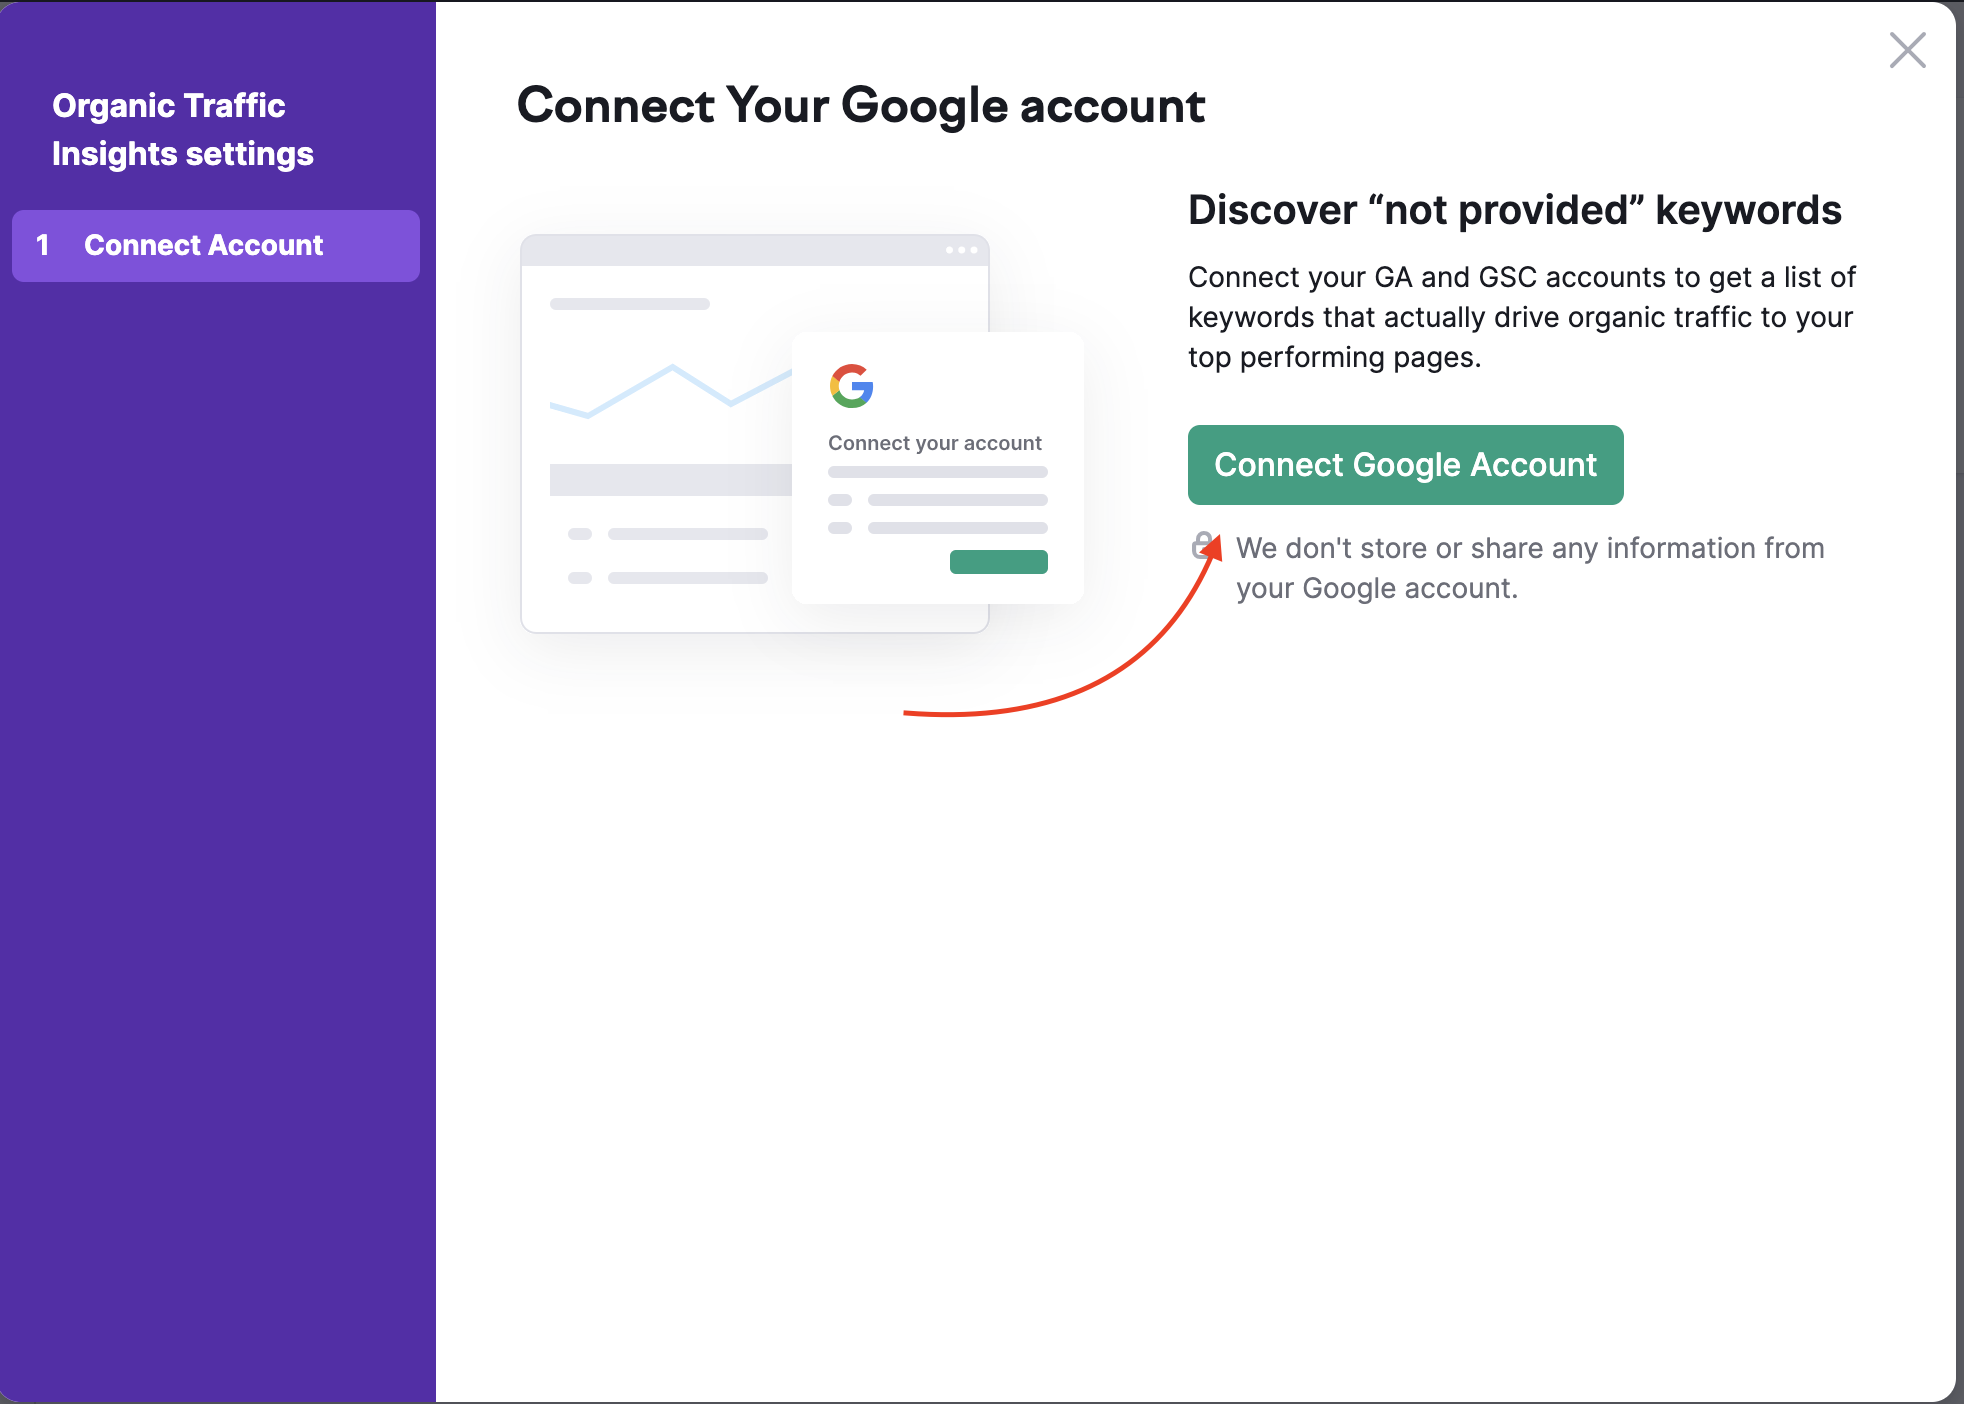 Connect Account section in the Organic Traffic Insights set up wizard with a red arrow pointing to the Connect Google Account button.